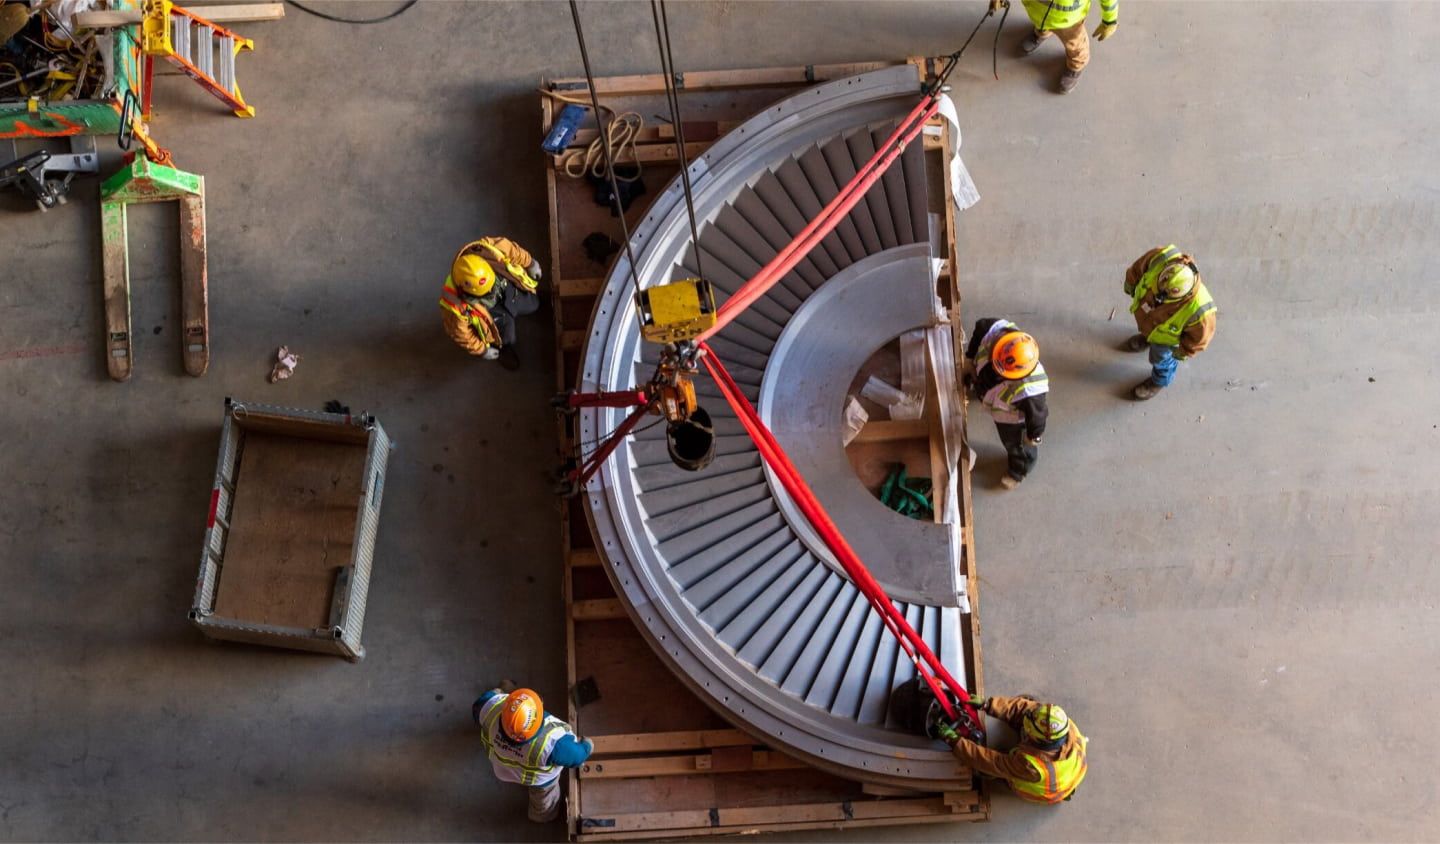 People maneuvering a large piece of equipment at Vogtle nuclear power plant.